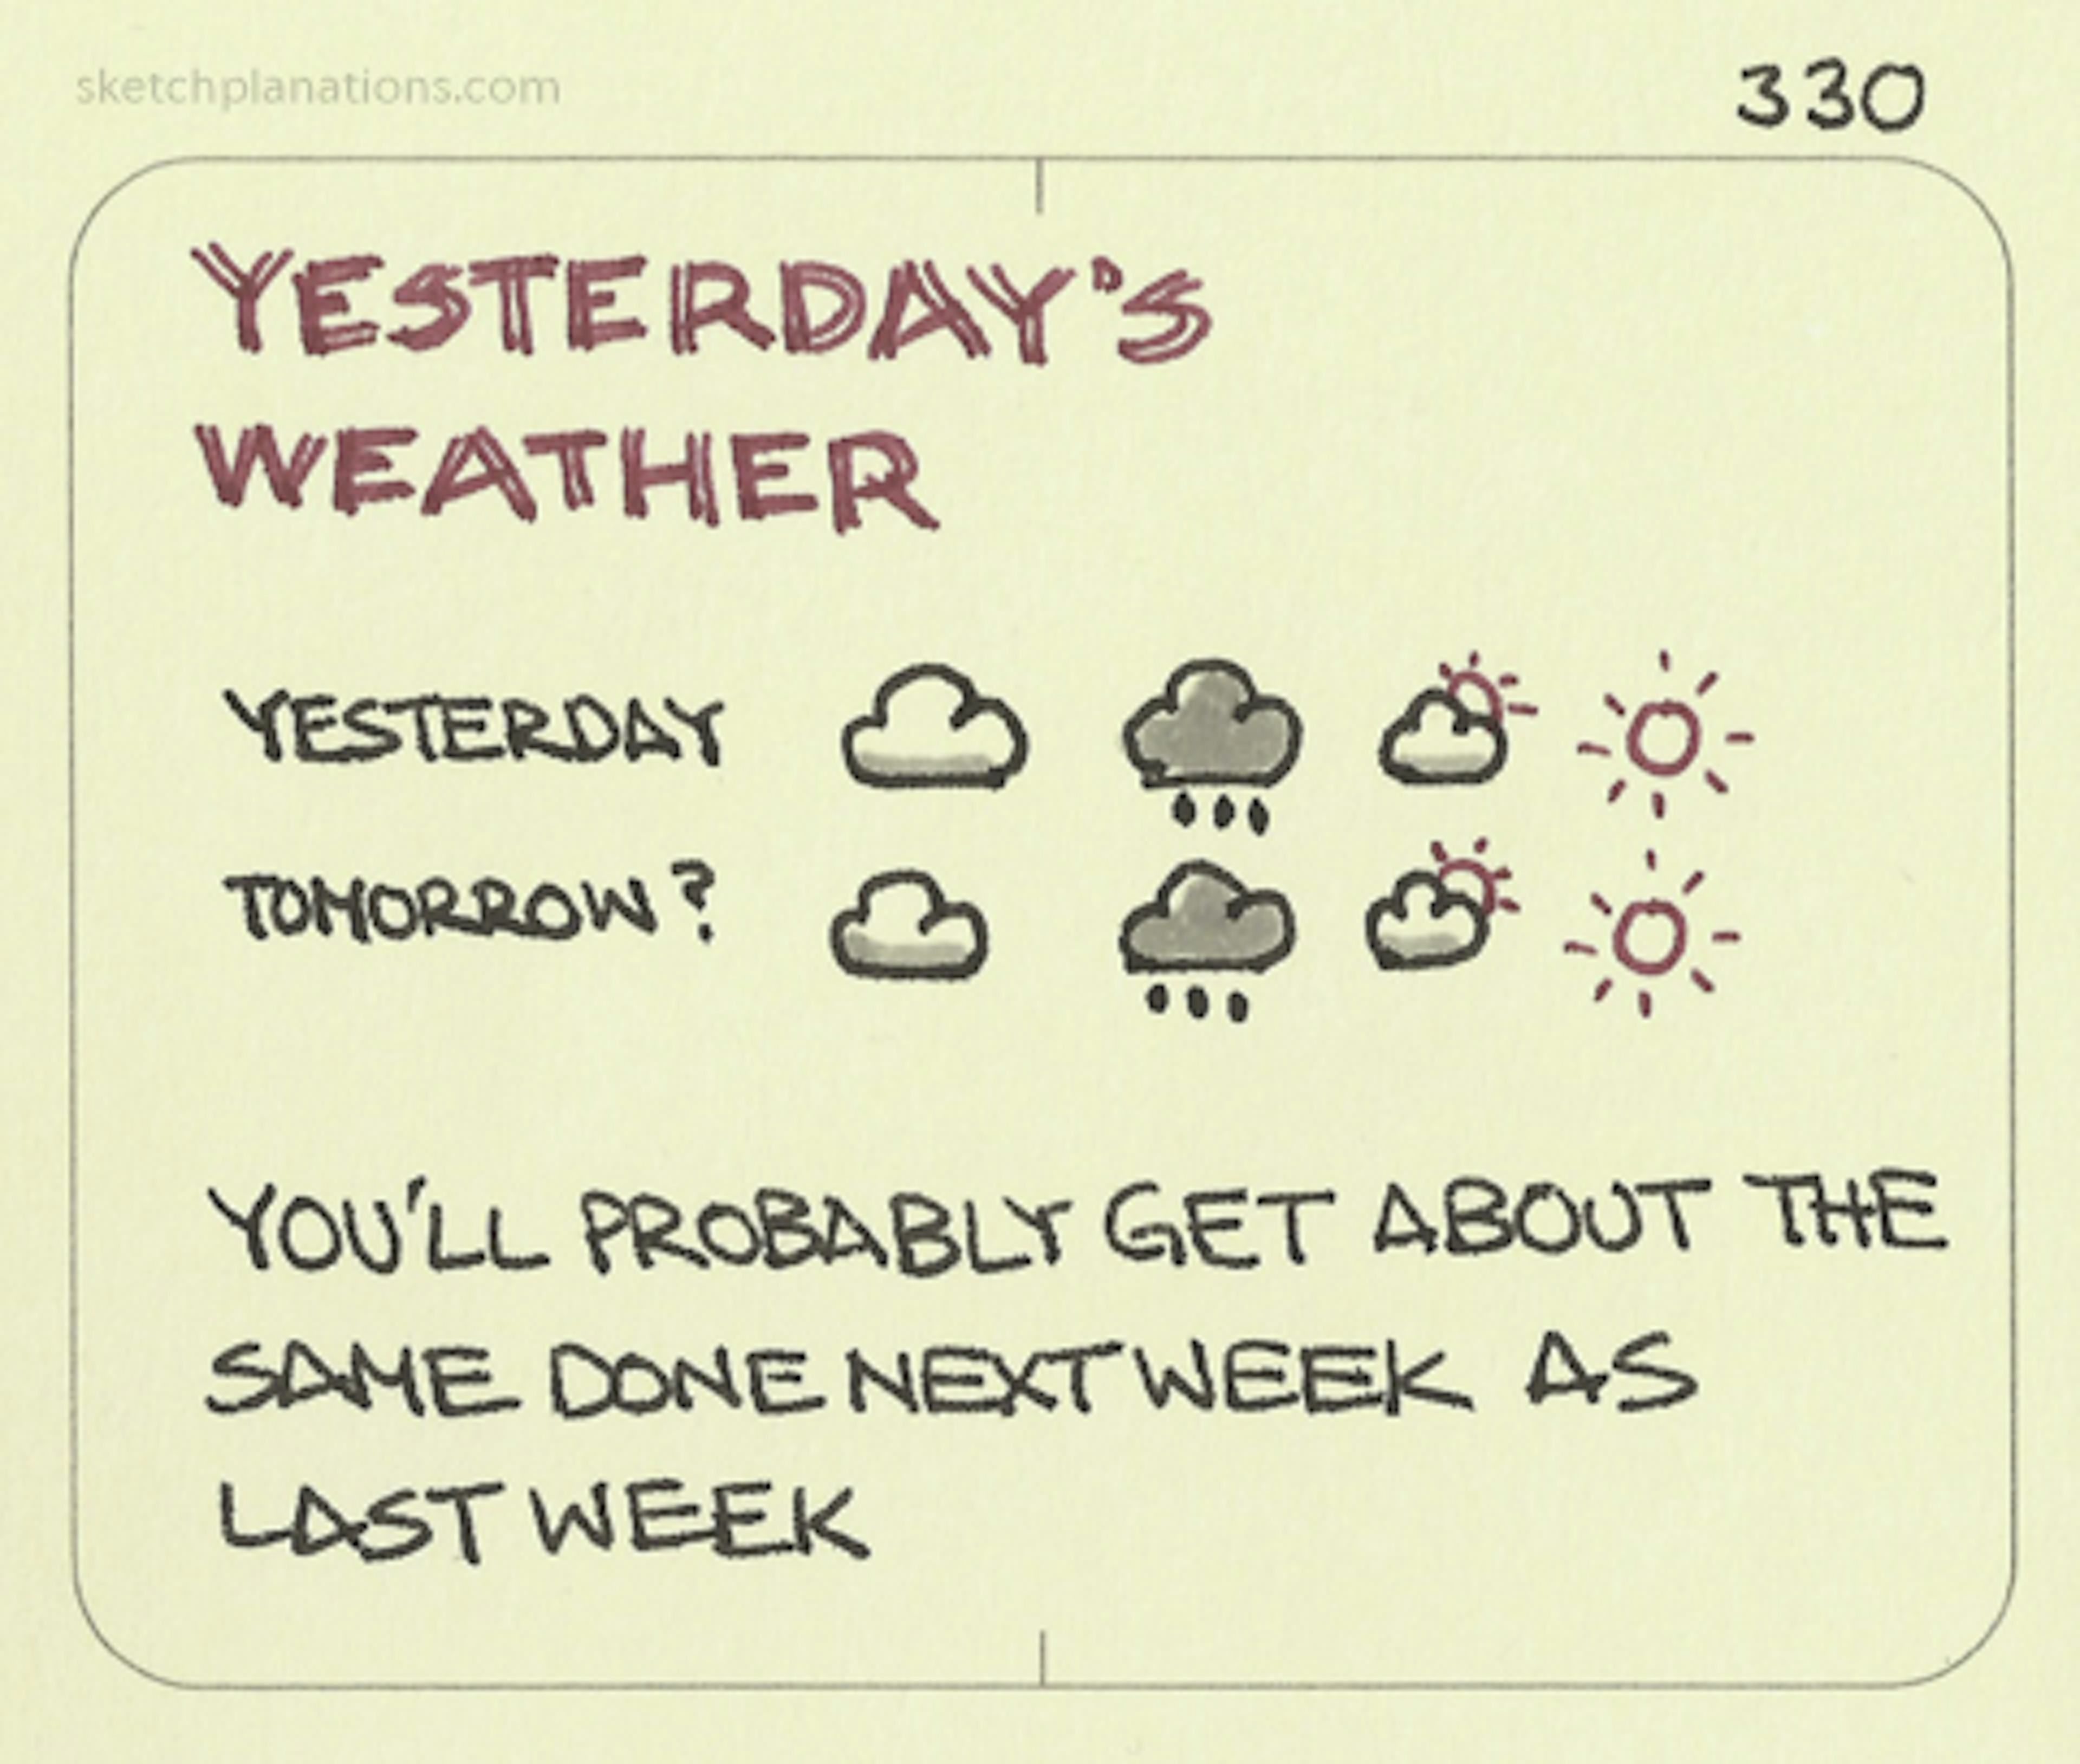 Yesterday’s weather - Sketchplanations